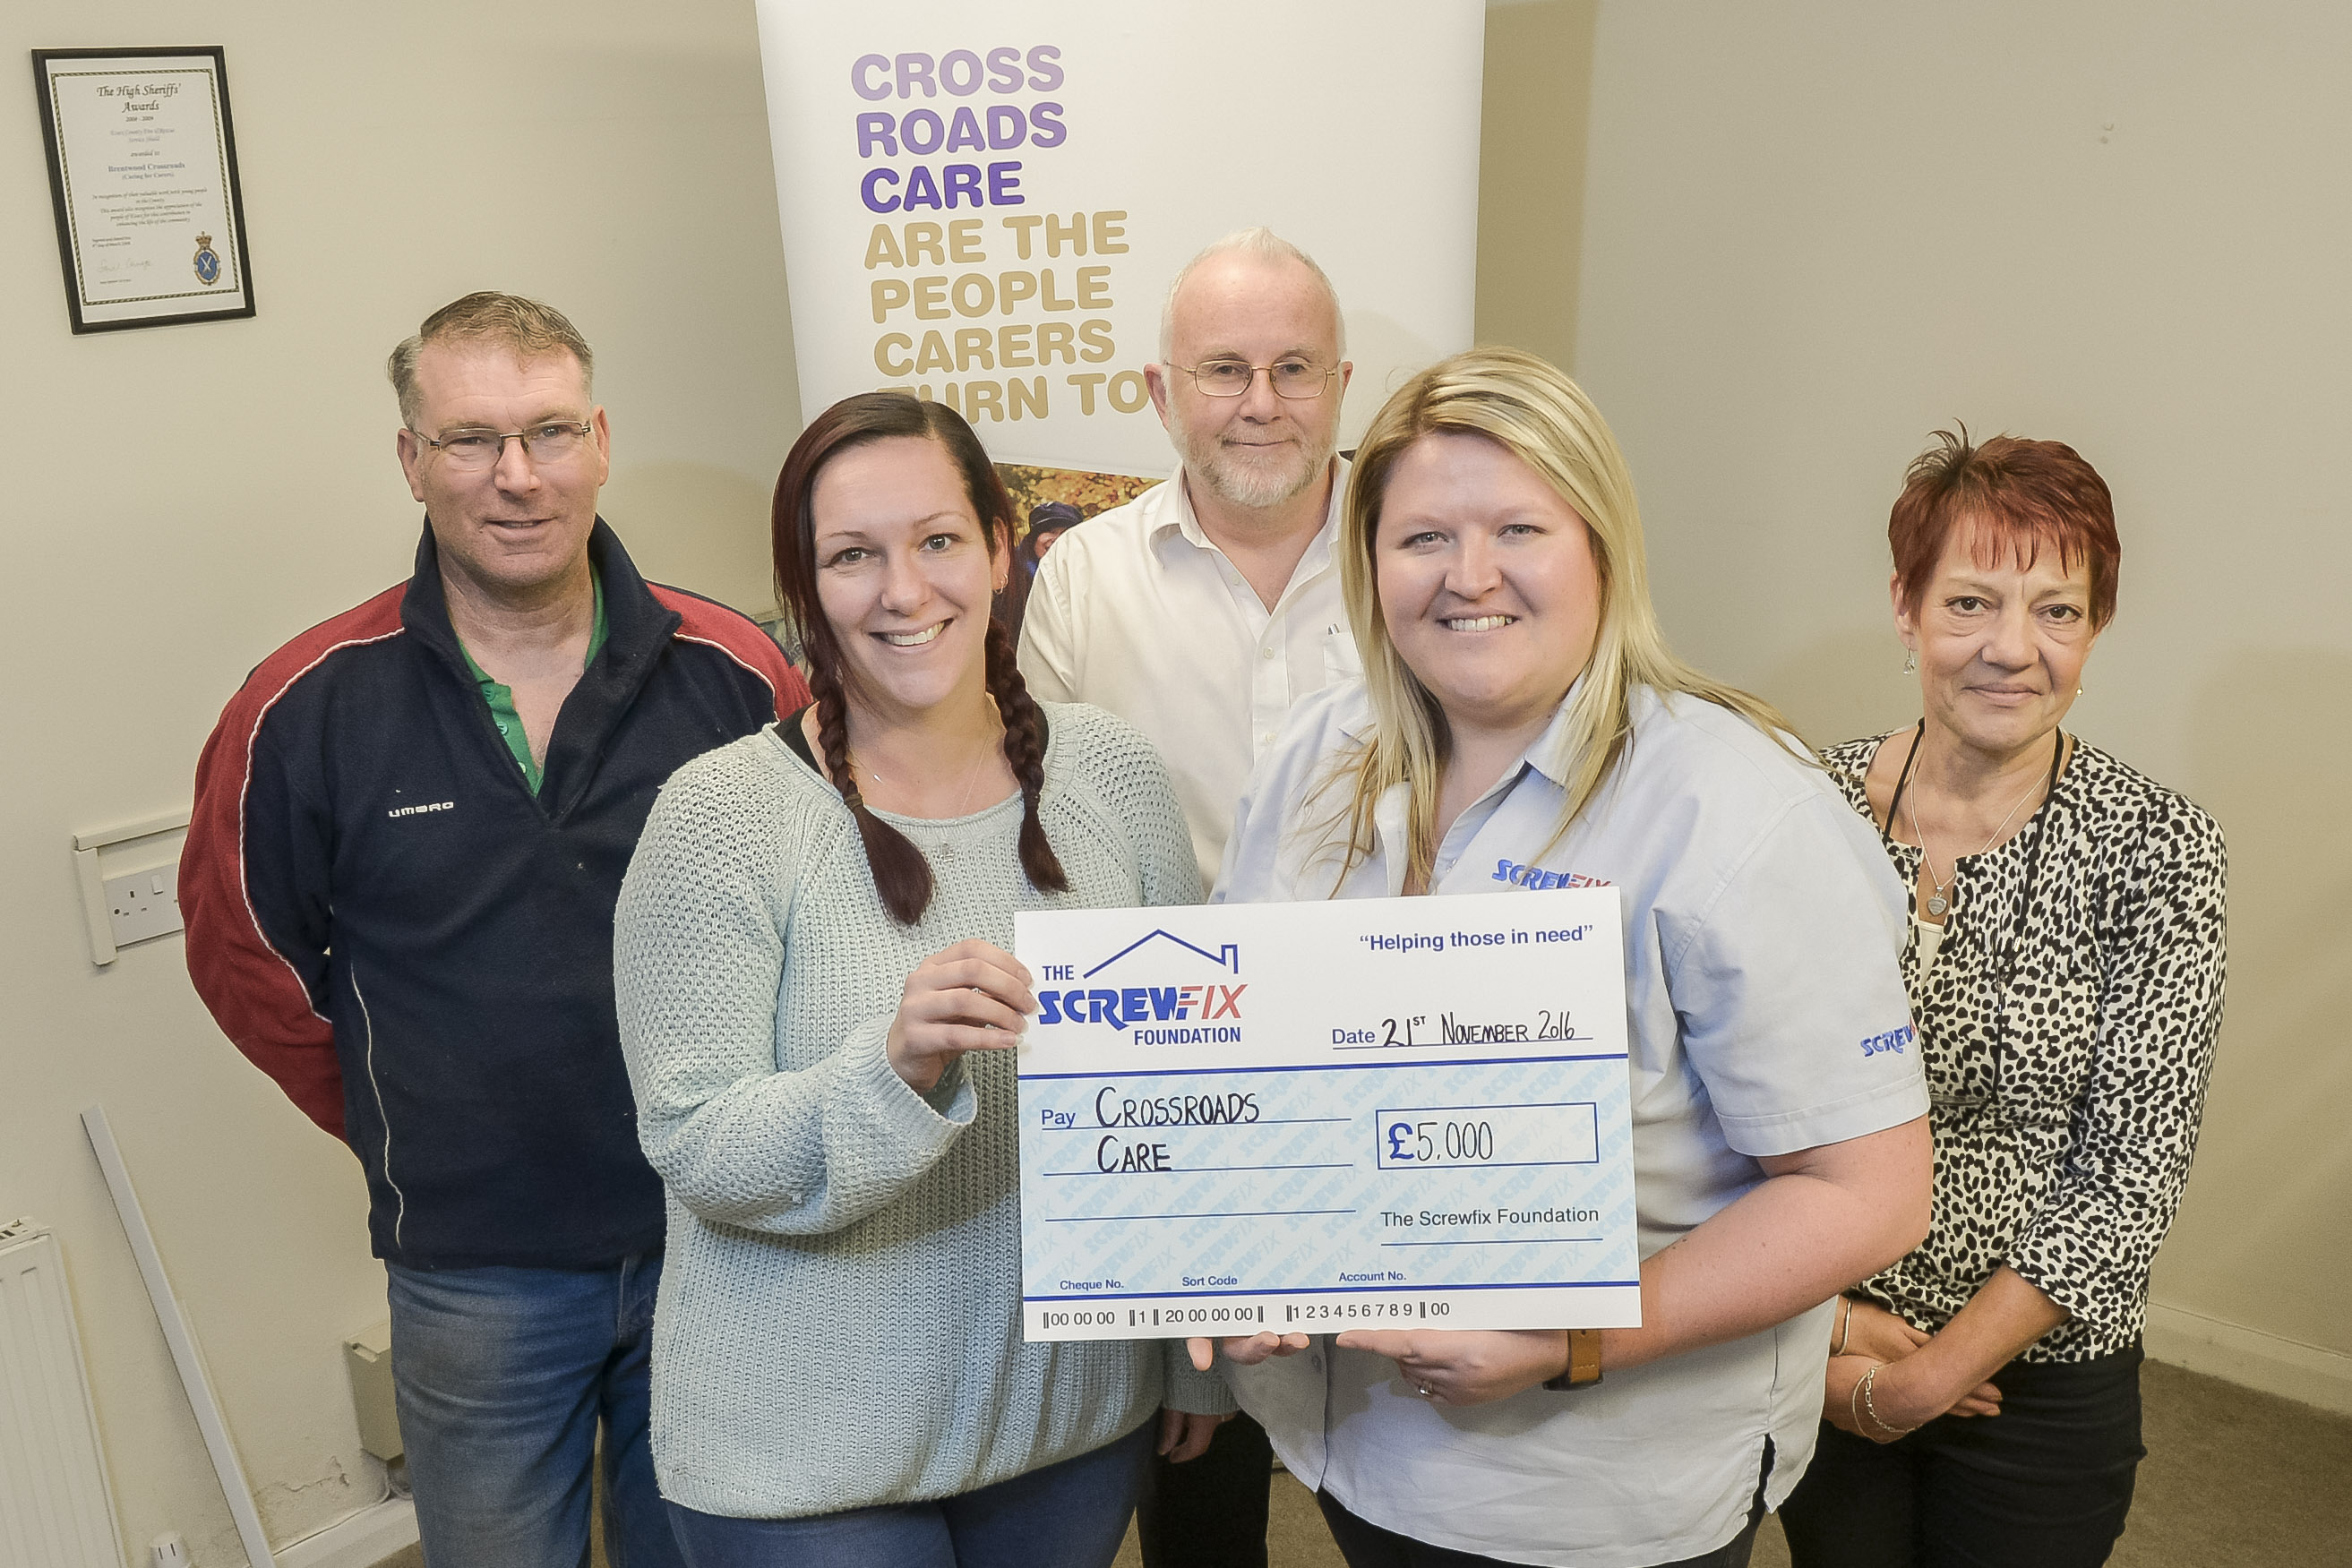 Essex based charity gets a helping hand from the Screwfix Foundation